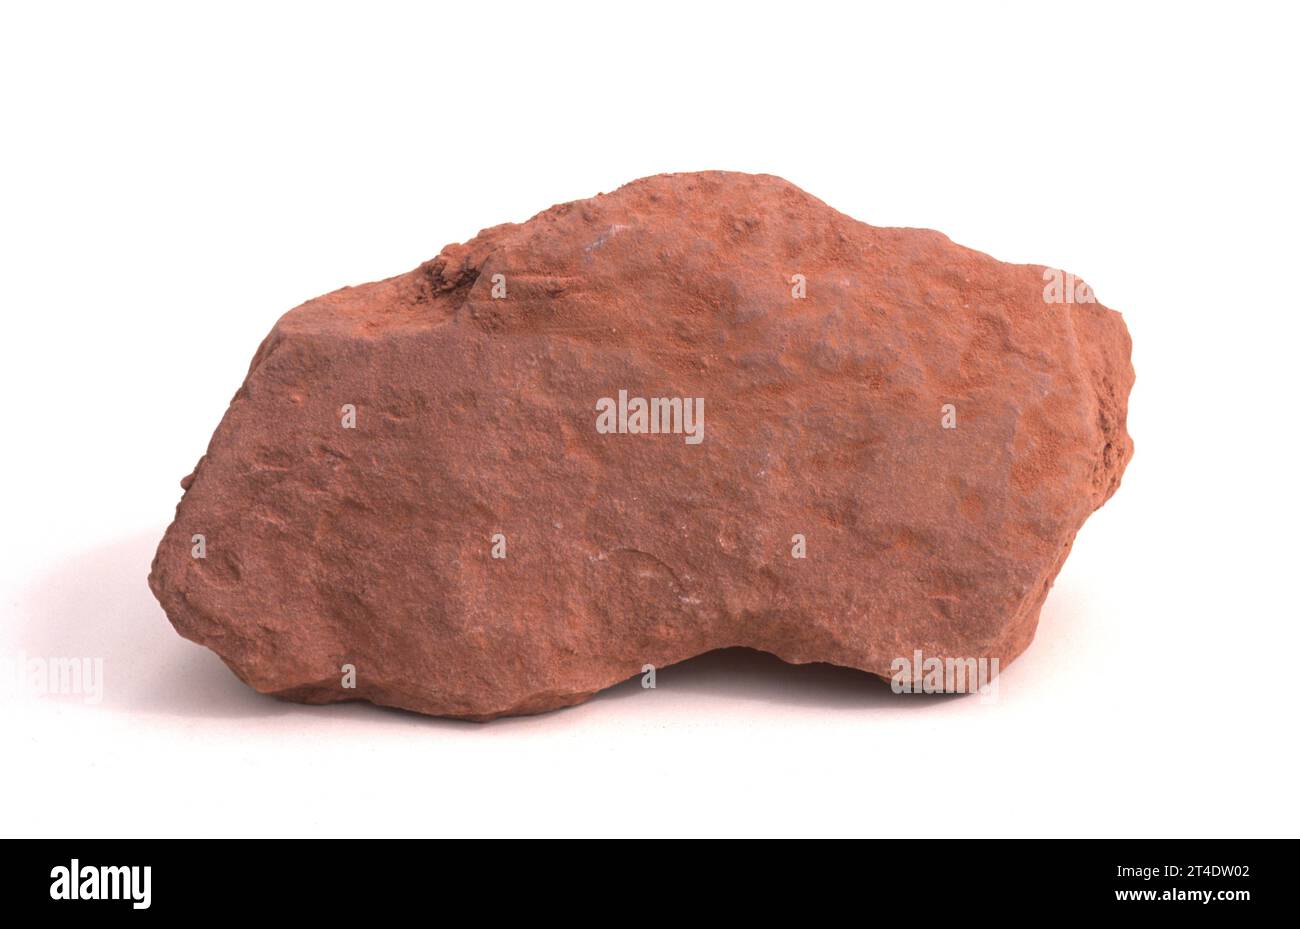 Red mudstone is a fine-grained sedimentary rock composed by clay minerals. Sample. Stock Photo